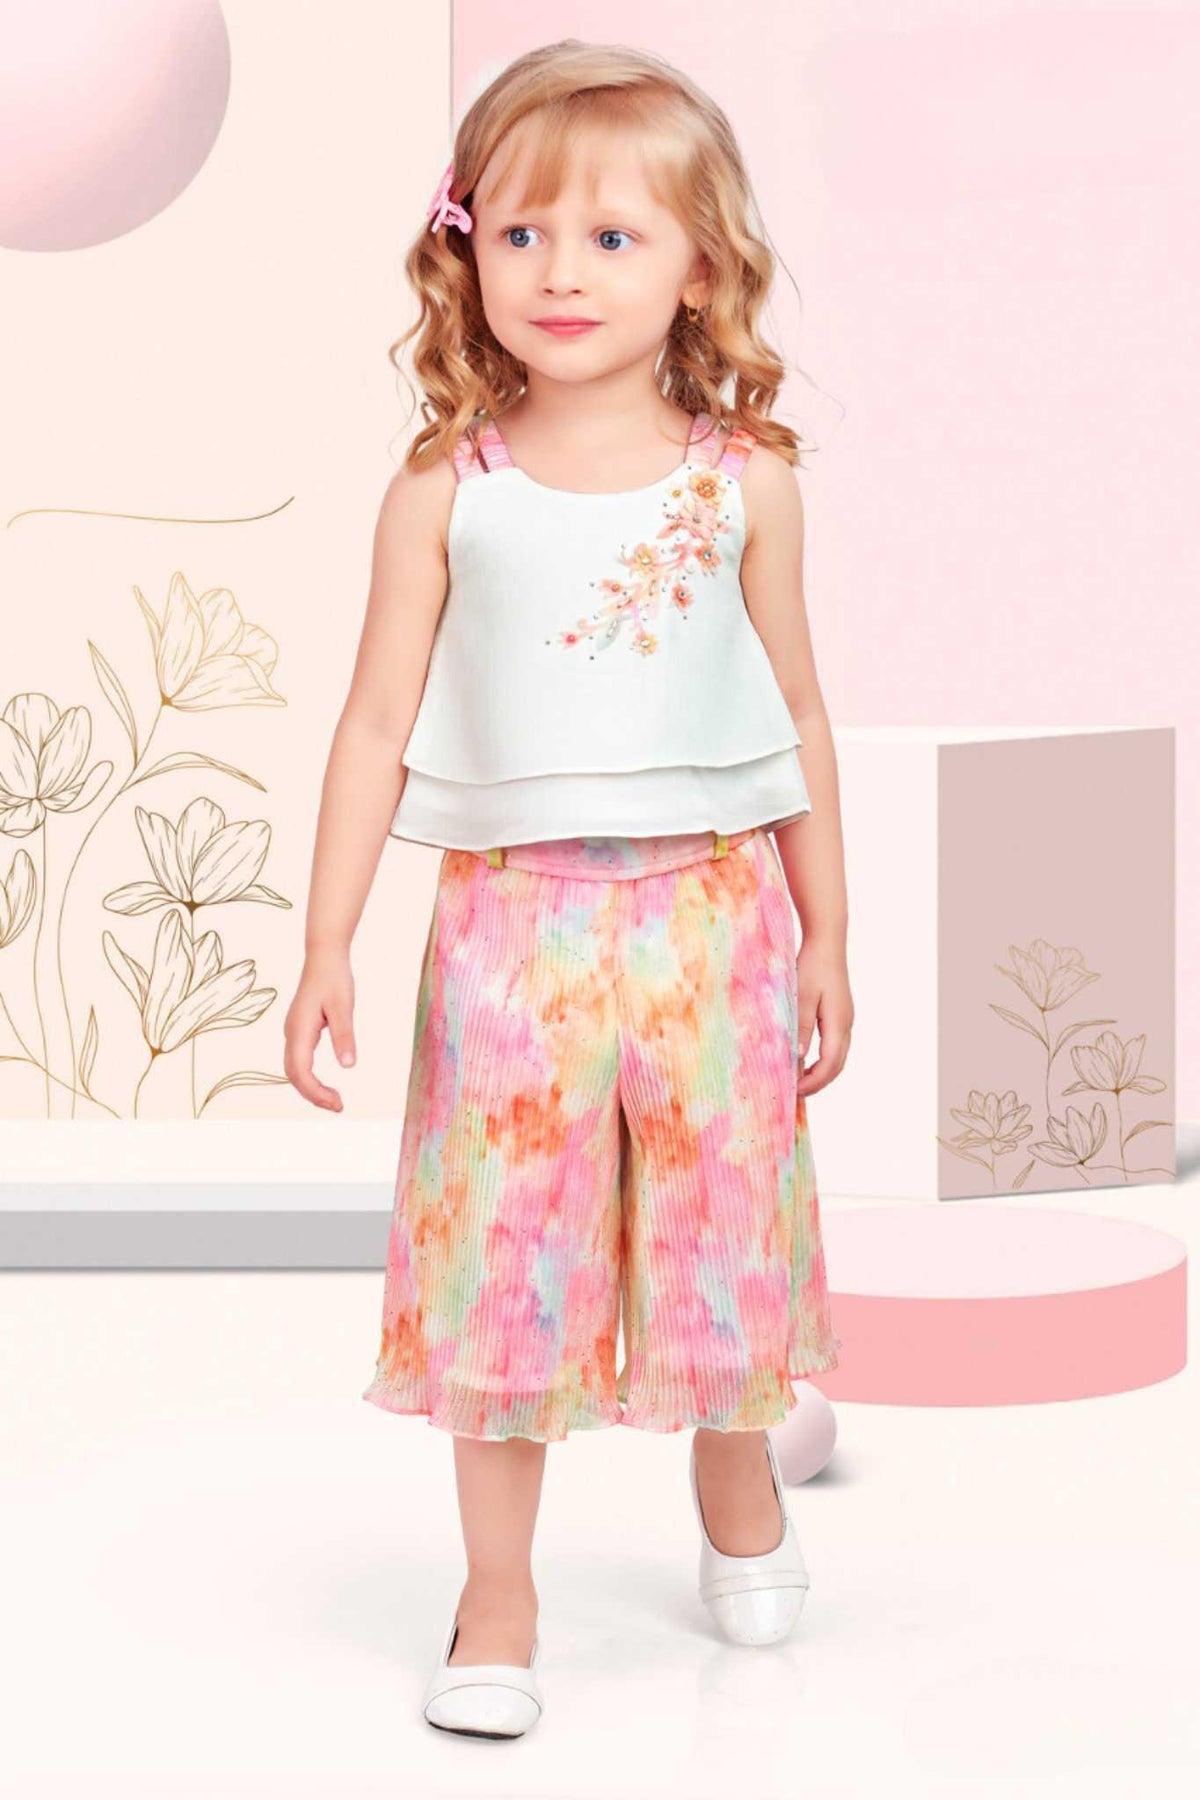 Elegant White Top With Multicolour Tie And Dye Pant Set For Girls - Lagorii Kids